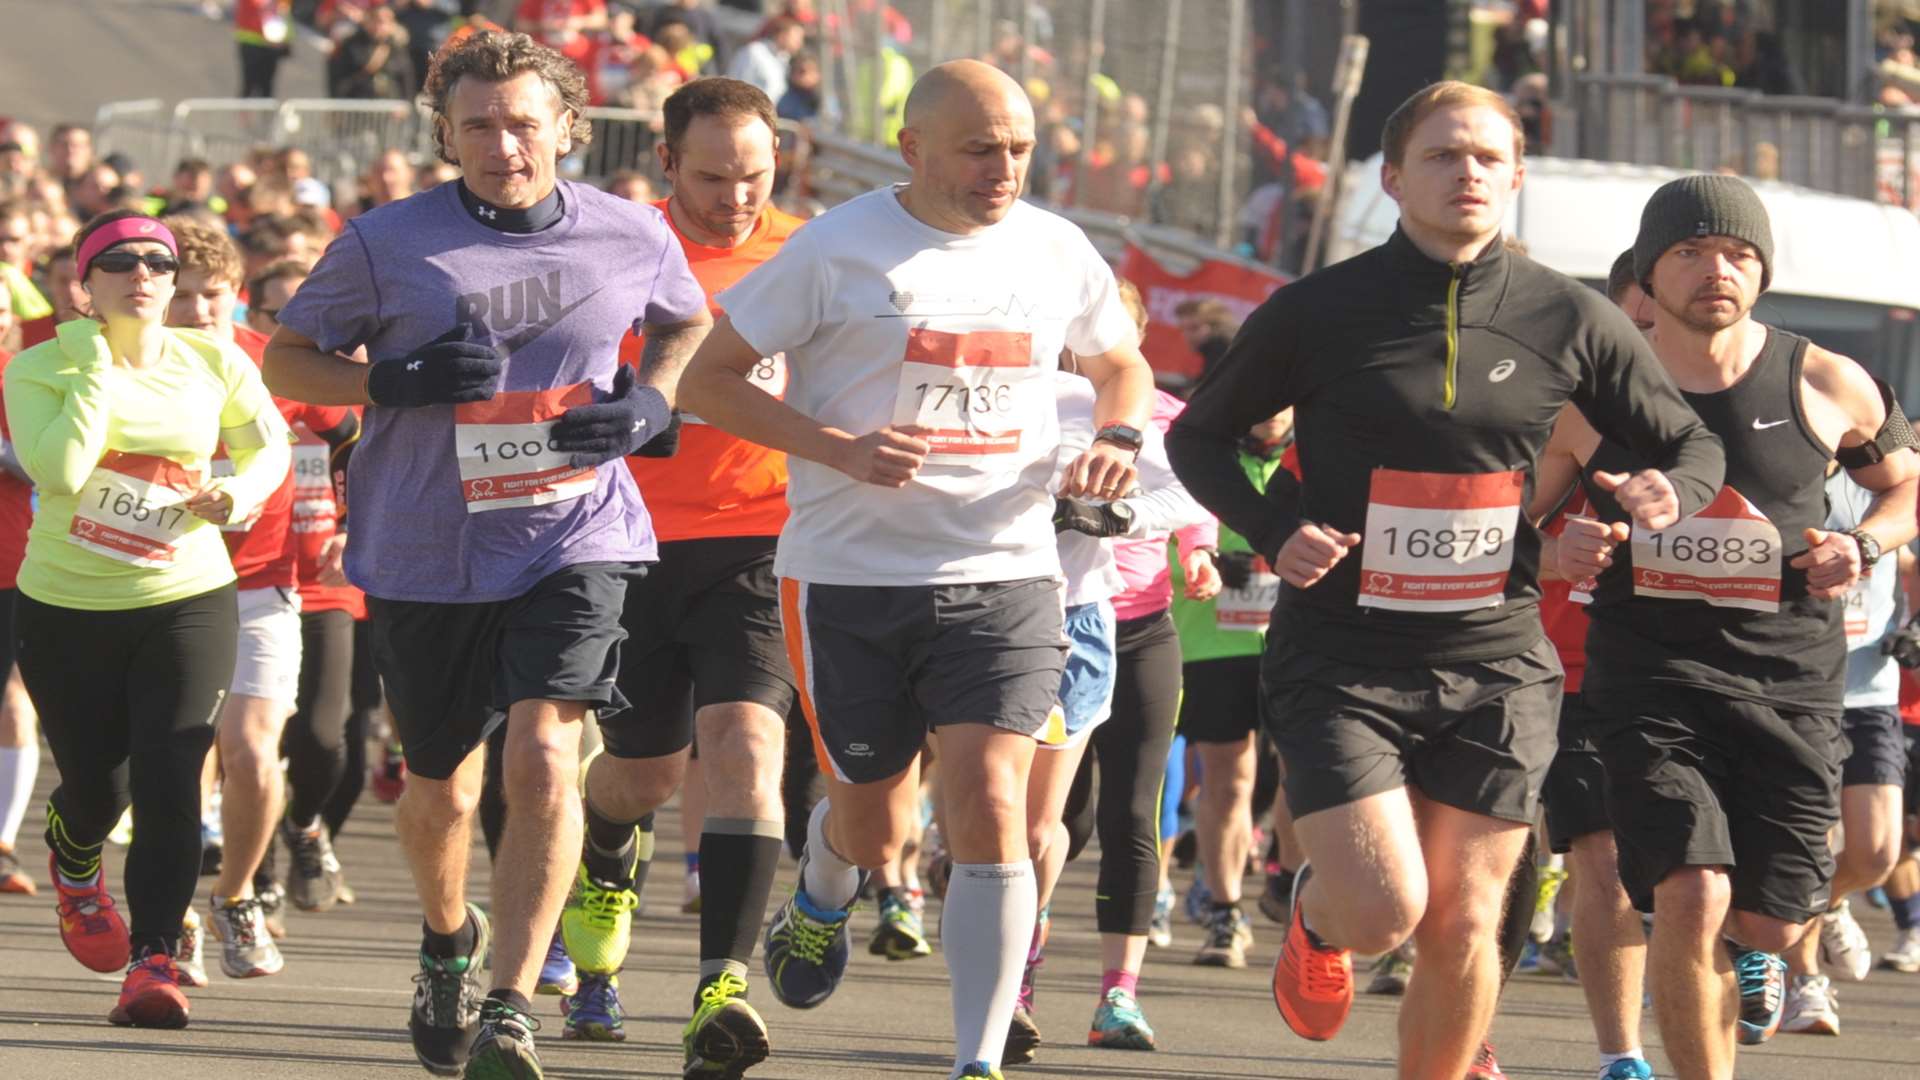 Up and running as the half-marathon runners get under way at Brands Hatch Picture: Steve Crispe